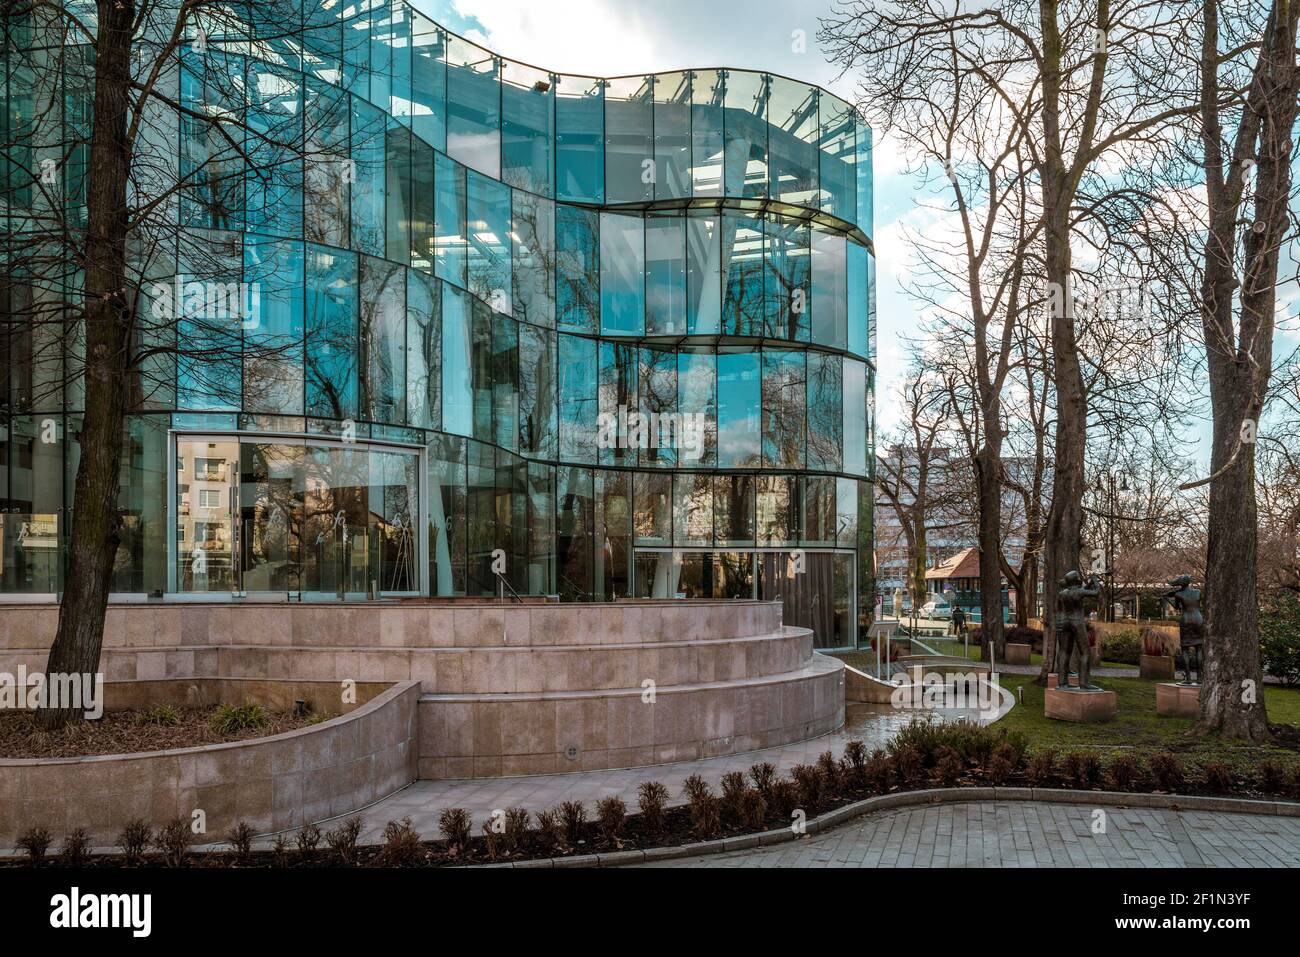 OPOLE, POLAND - Mar 06, 2021: a beautiful and modern building of the Philharmonic in Opole made entirely of glass Stock Photo